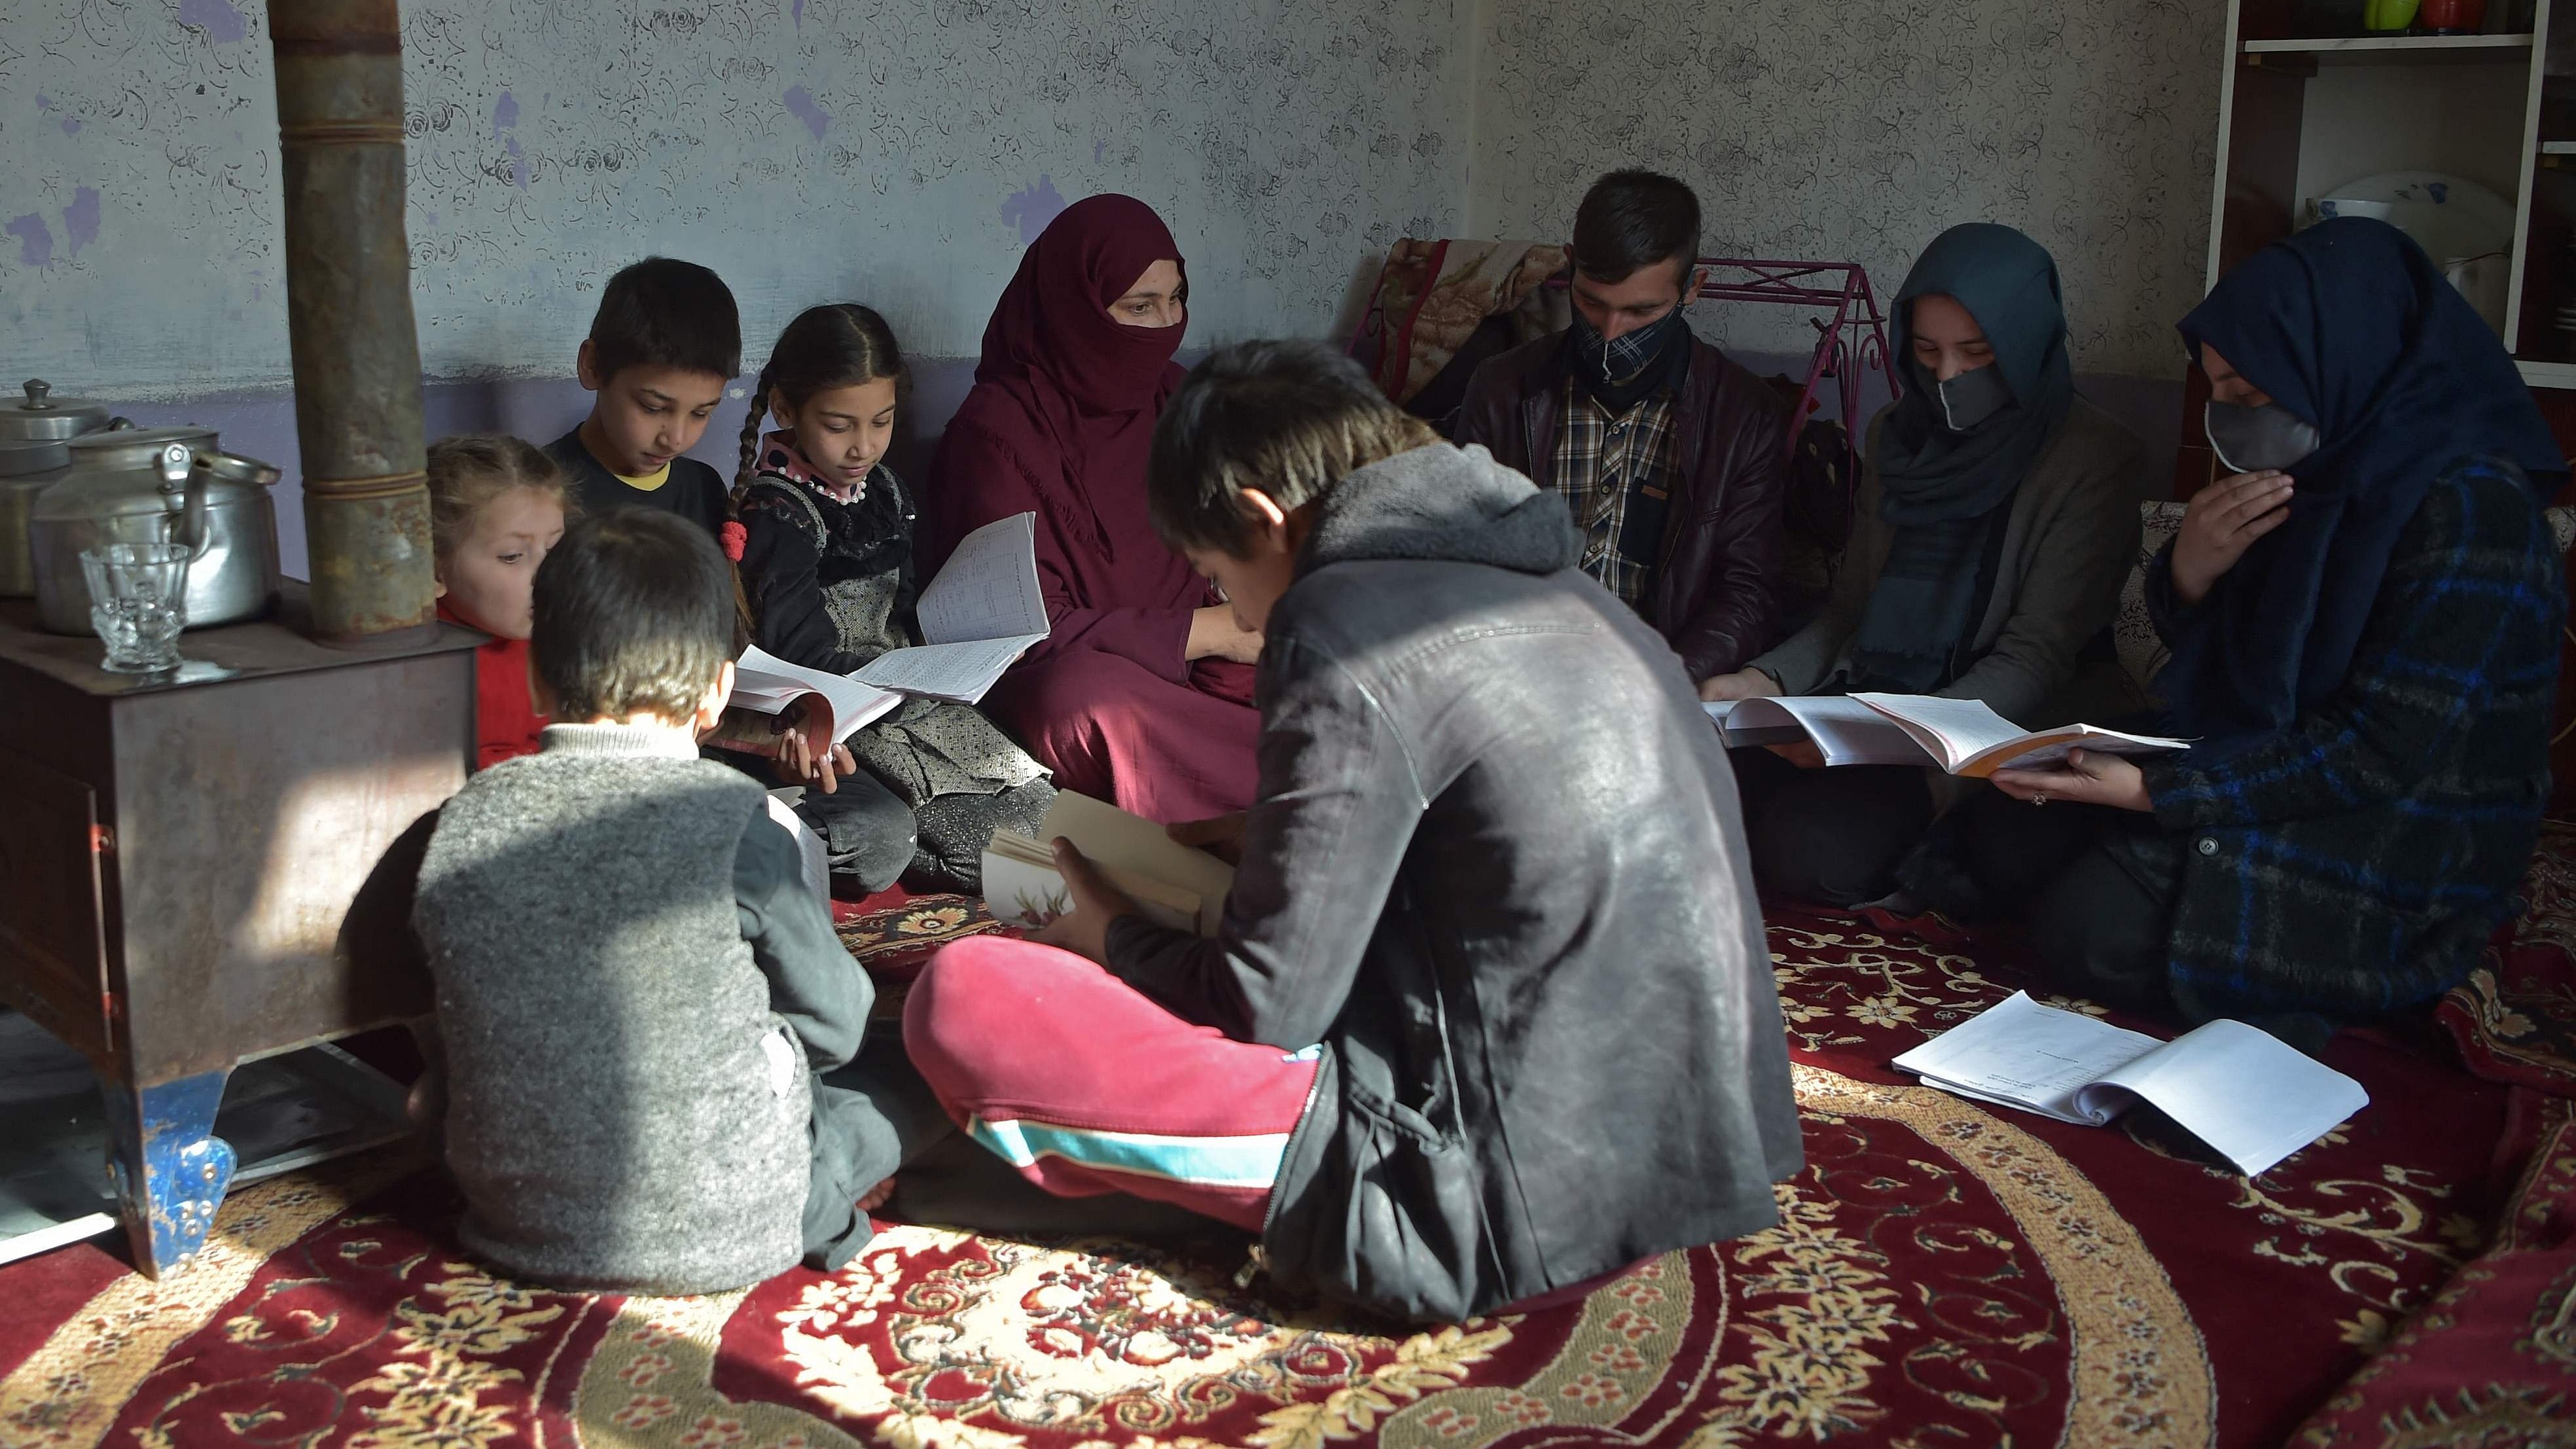 Since the Taliban takeover of Afghanistan last August, girls have been excluded from secondary education, but the regime allowed women to study at universities in gender-segregated classrooms. Credit: AFP Photo